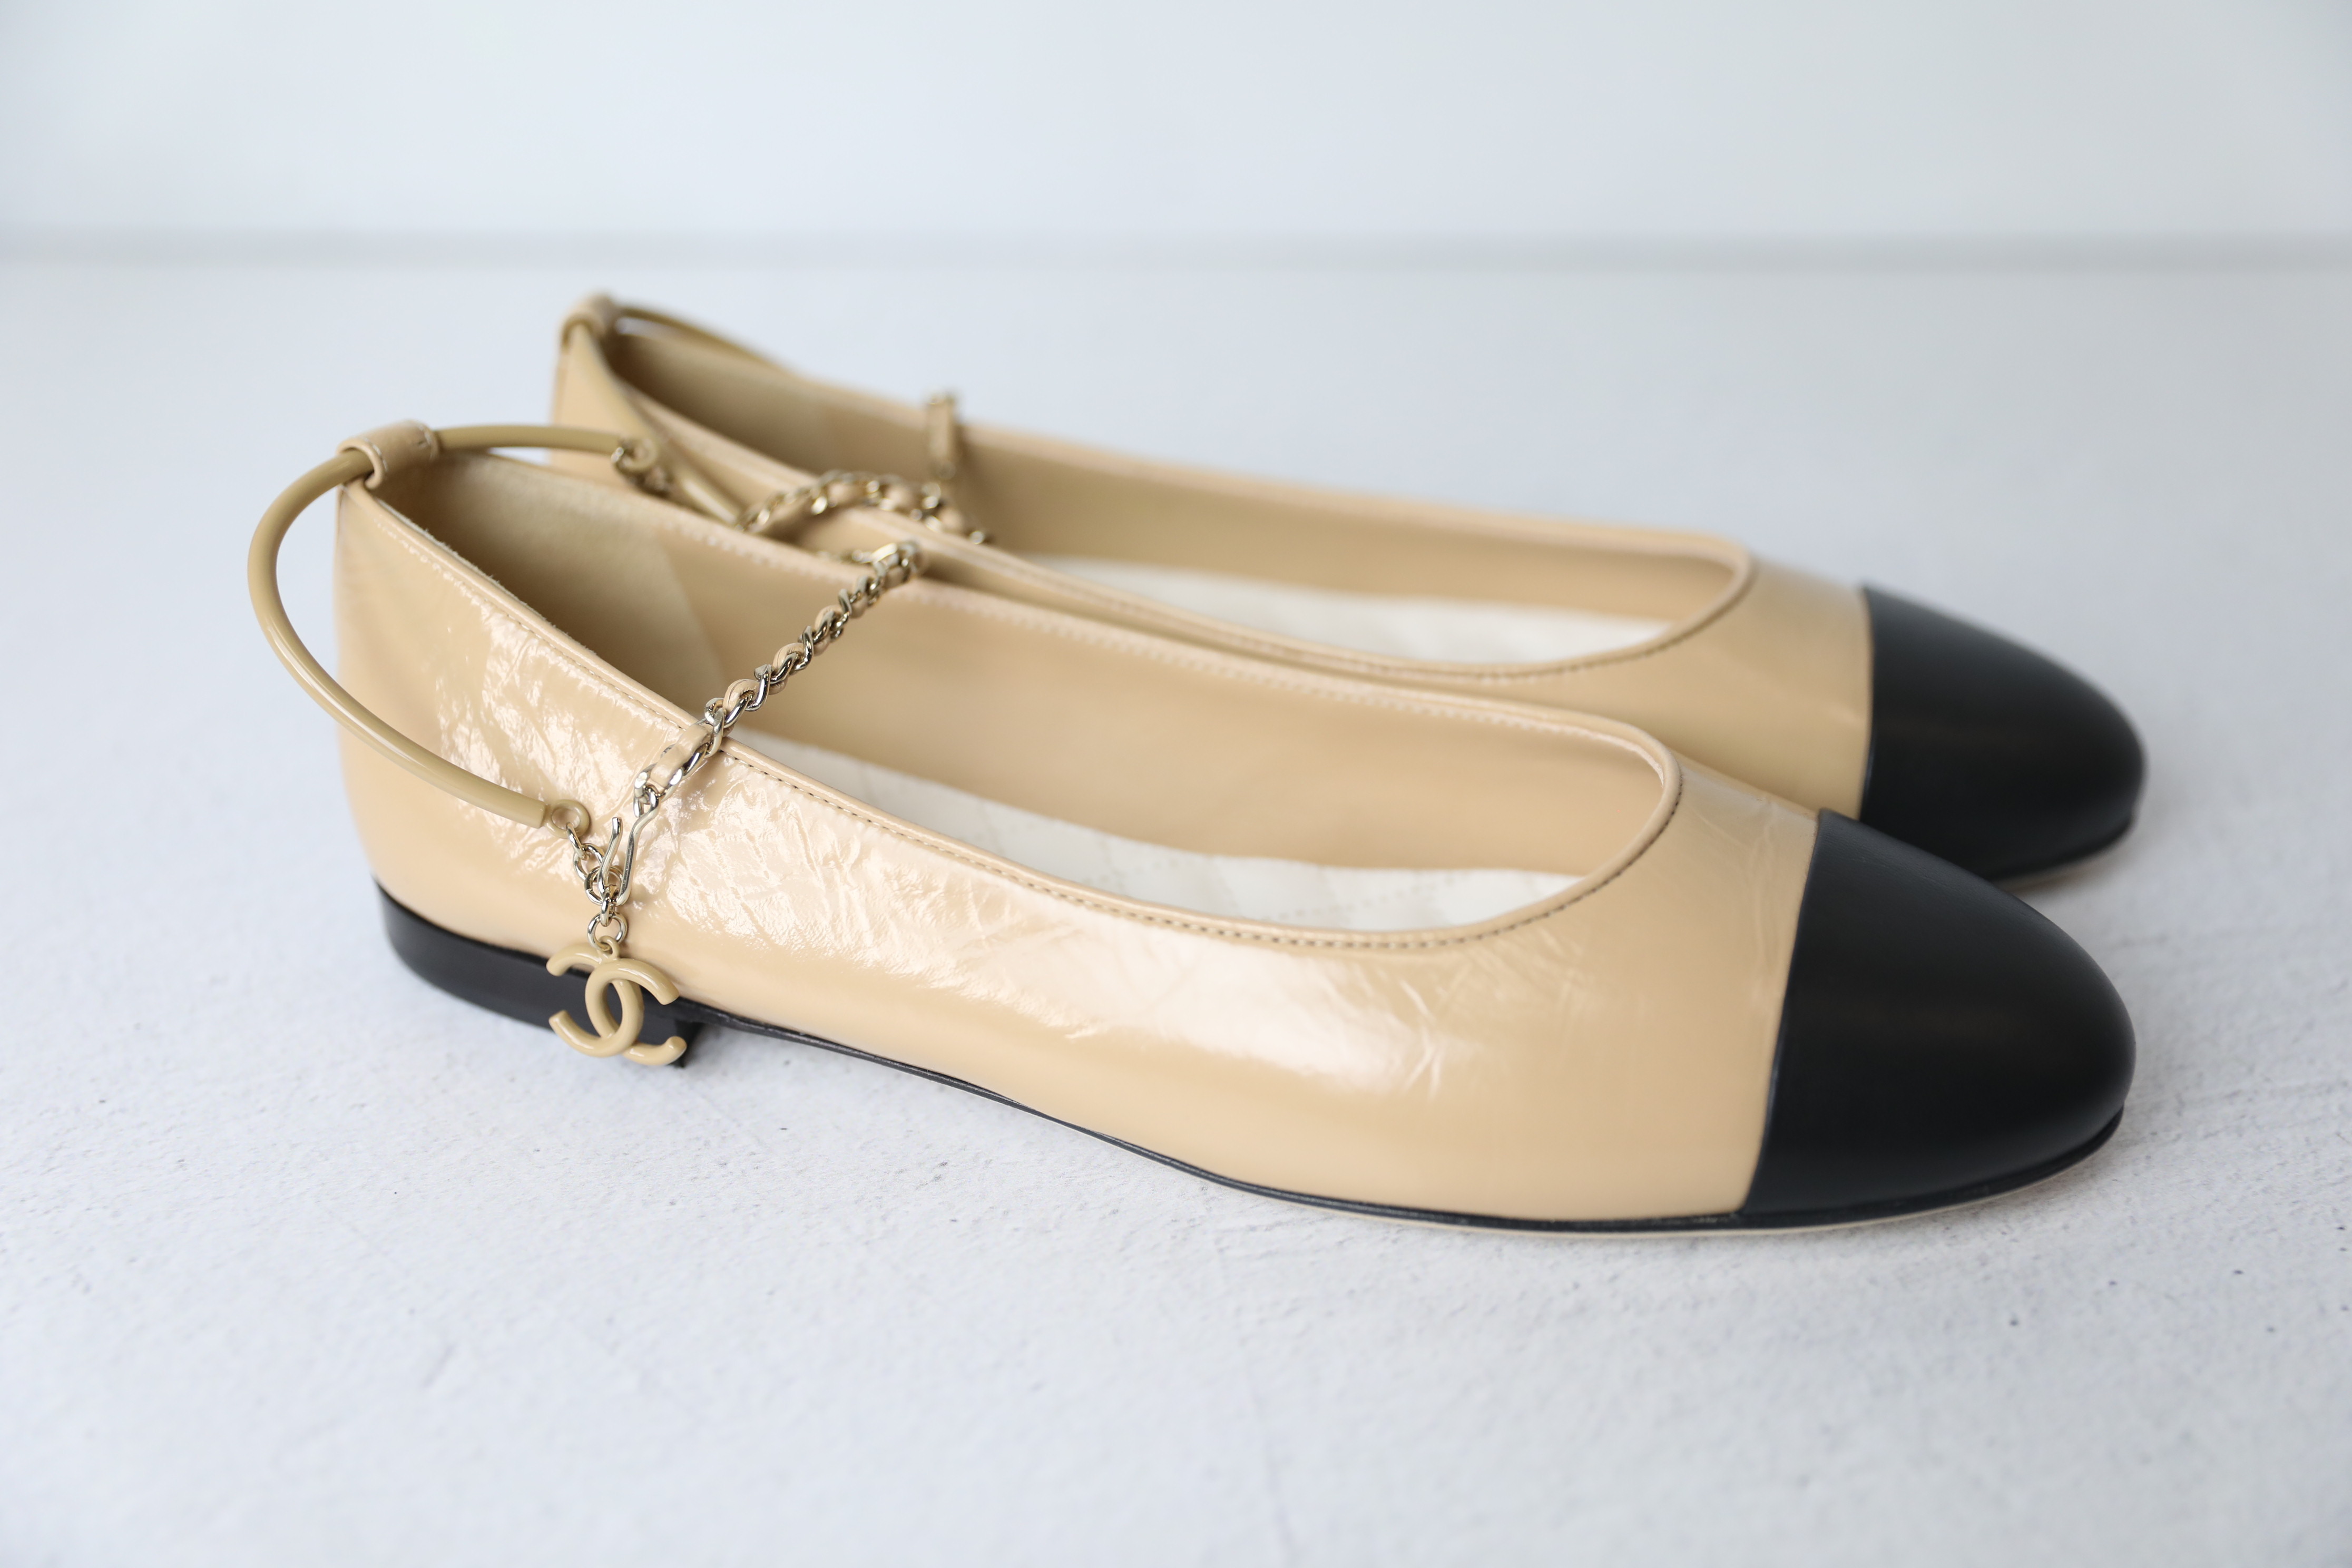 Chanel Ballet Flats with Ankle Strap, Beige and Black, Size 41, As New in  Box WA001 - Julia Rose Boston